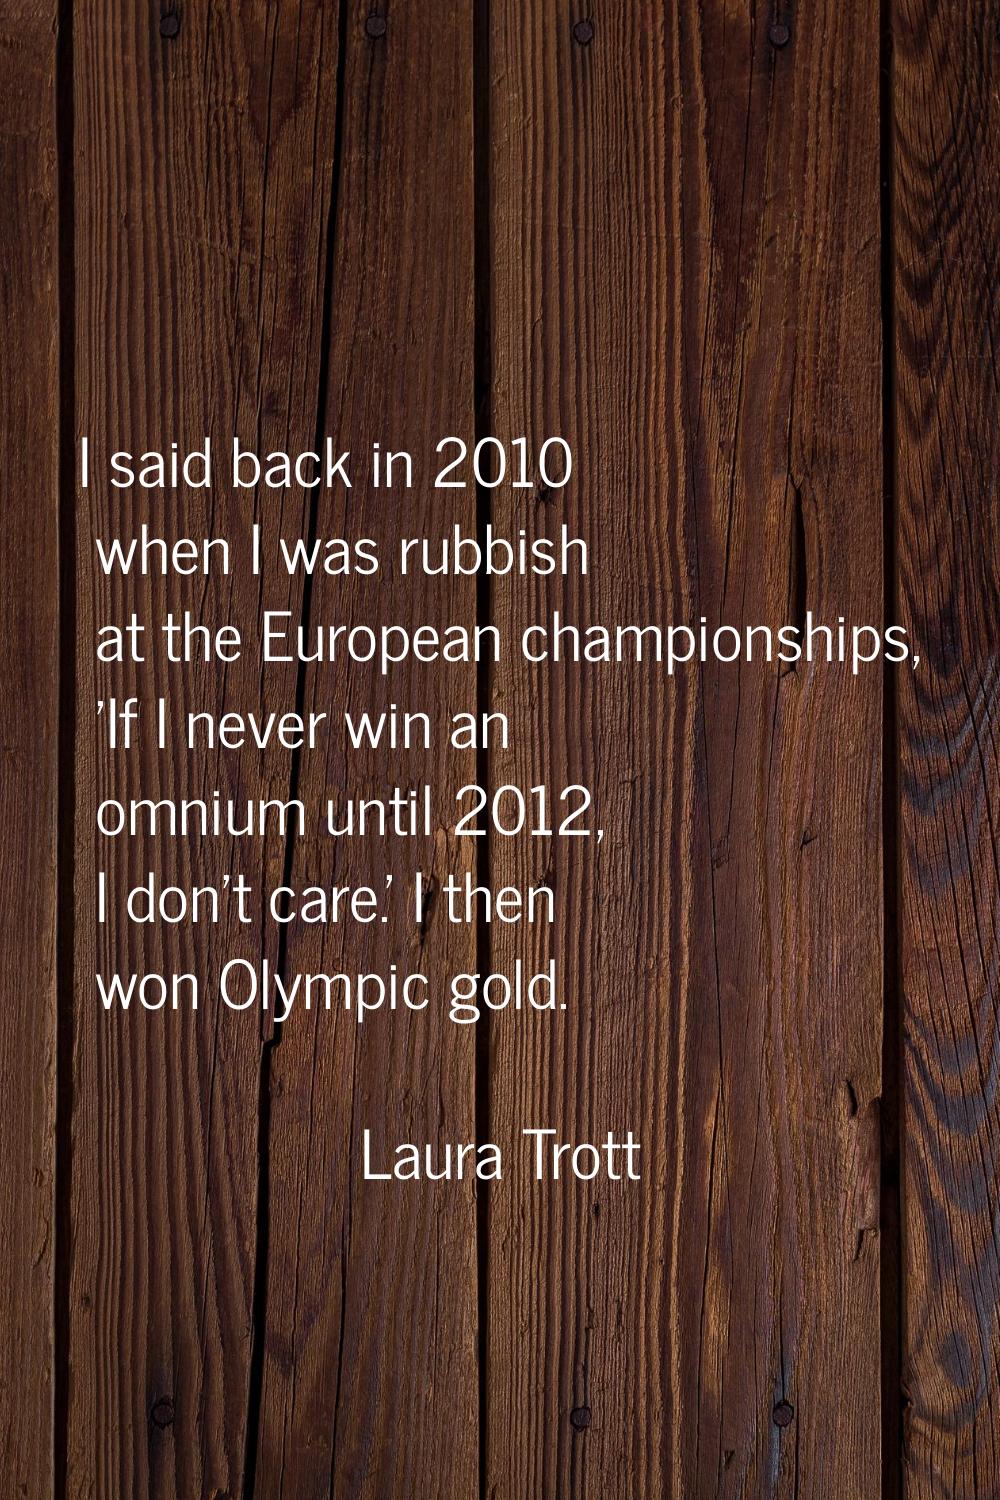 I said back in 2010 when I was rubbish at the European championships, 'If I never win an omnium unt